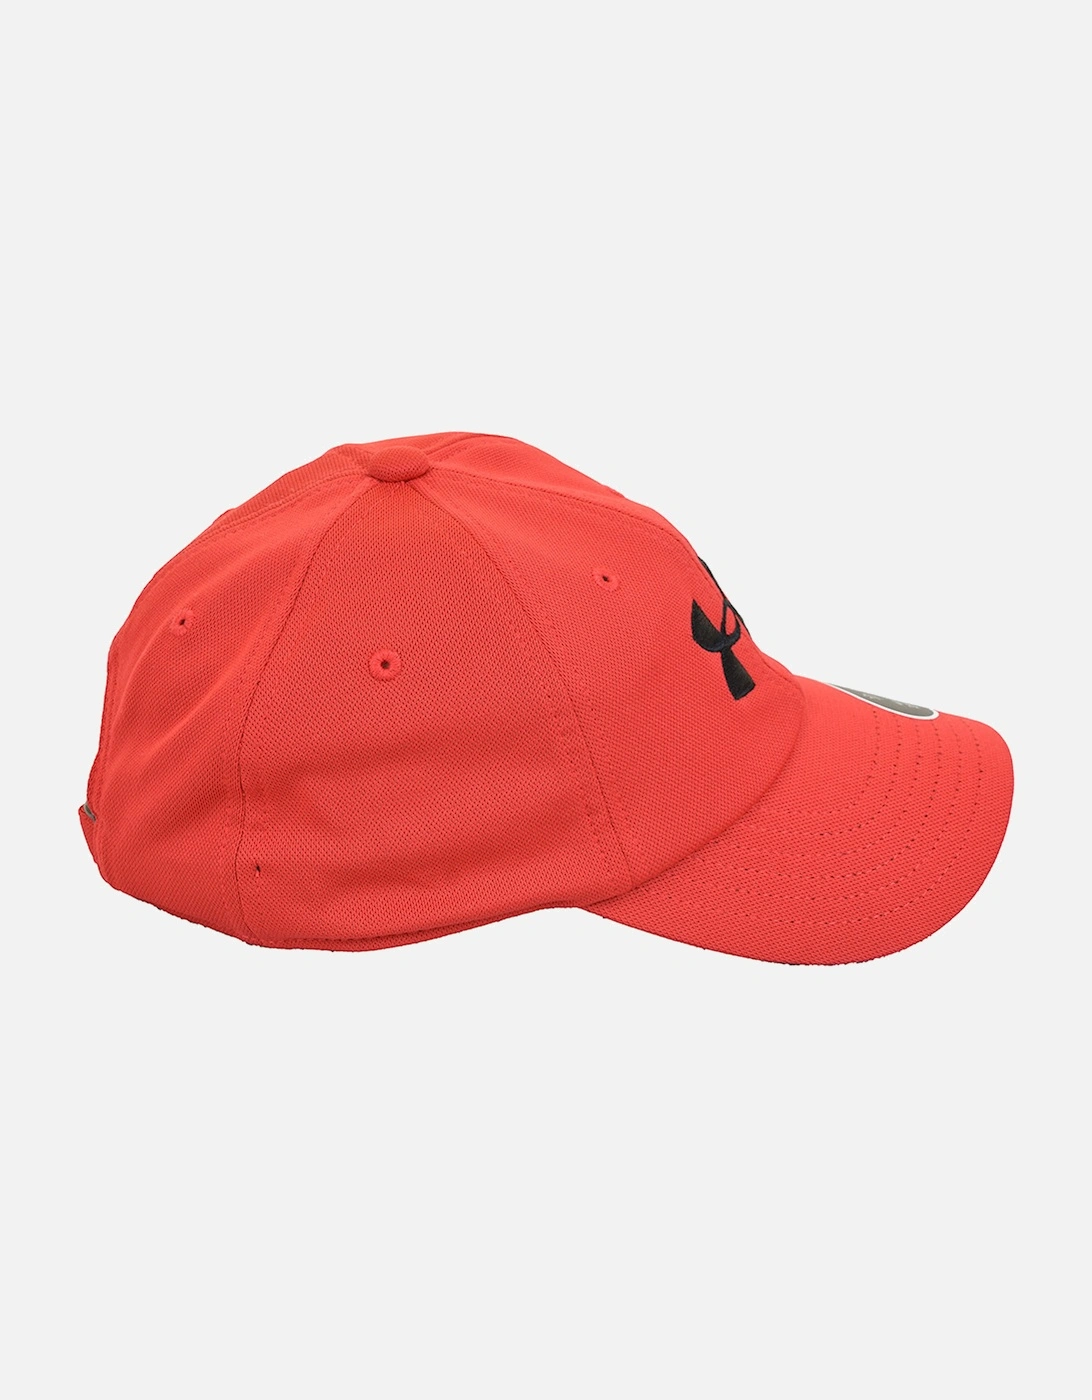 Youths Blitzing Adjustable Cap (Red)